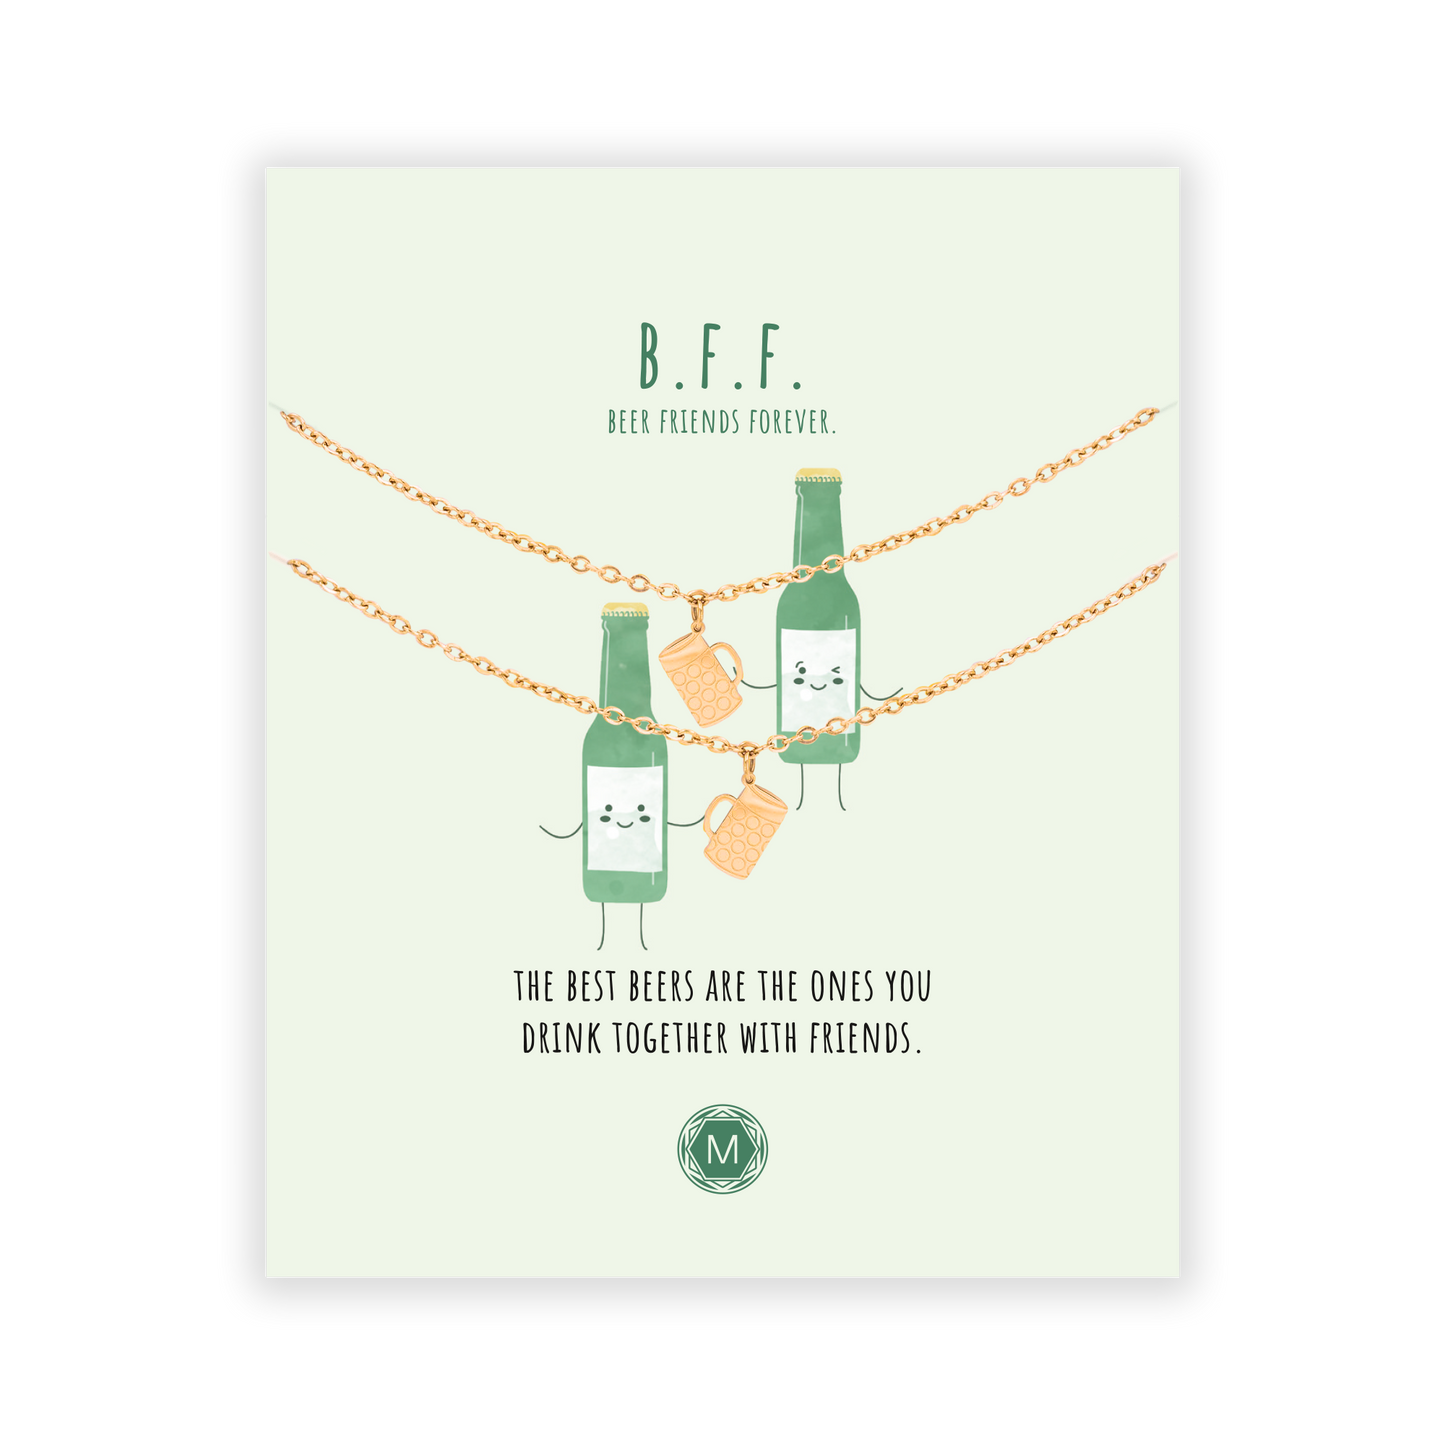 B.F.F. BEER FRIENDS FOREVER 2x Armband